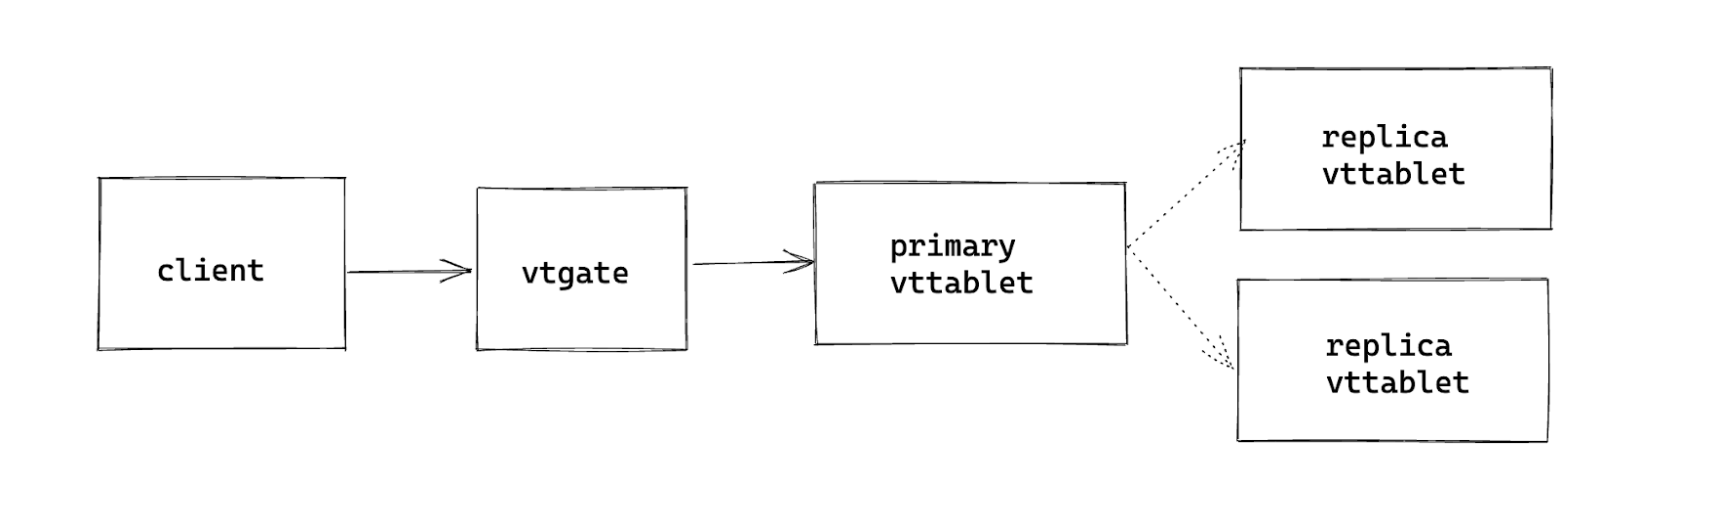 the client request goes through the vtgate and to the primary vttablet, with writes being replicated from the primary vttablet to the replica vttablets